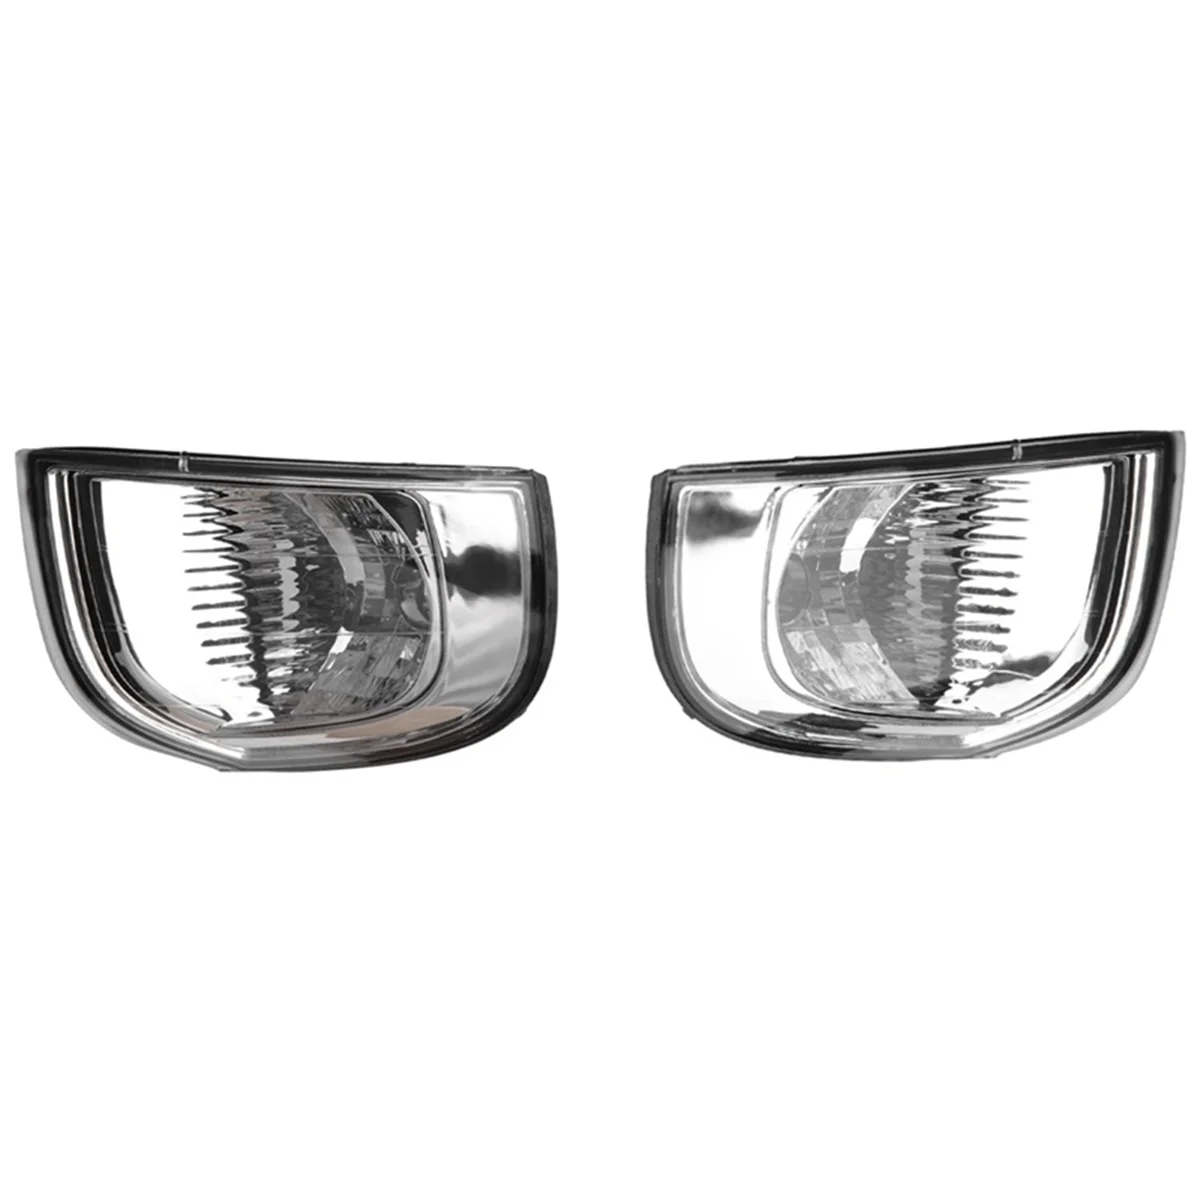 

Car Front Fog Lamps Corner Lamps Head Light Lamps Turn Signals Cars Fits for Volvo S80 1999-2006 30655422 30655423